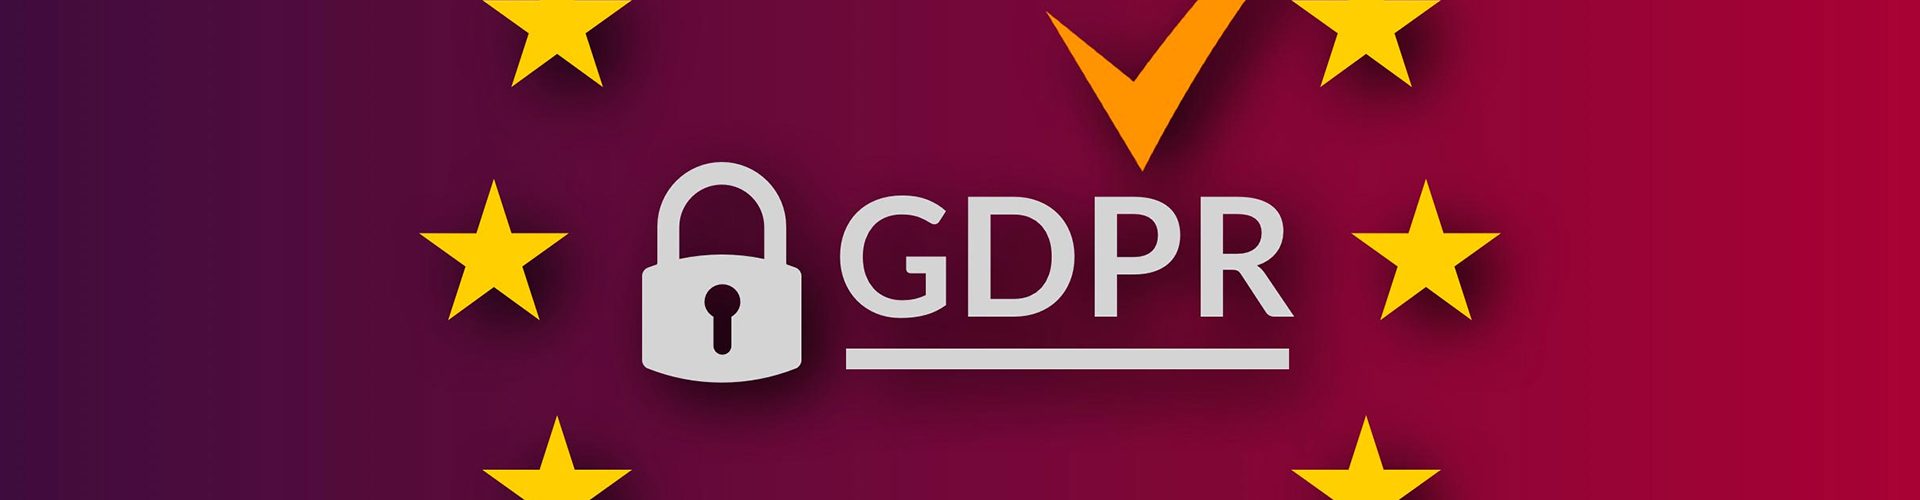 GDPR: A Milestone in Customer Data Security - Router Login Support